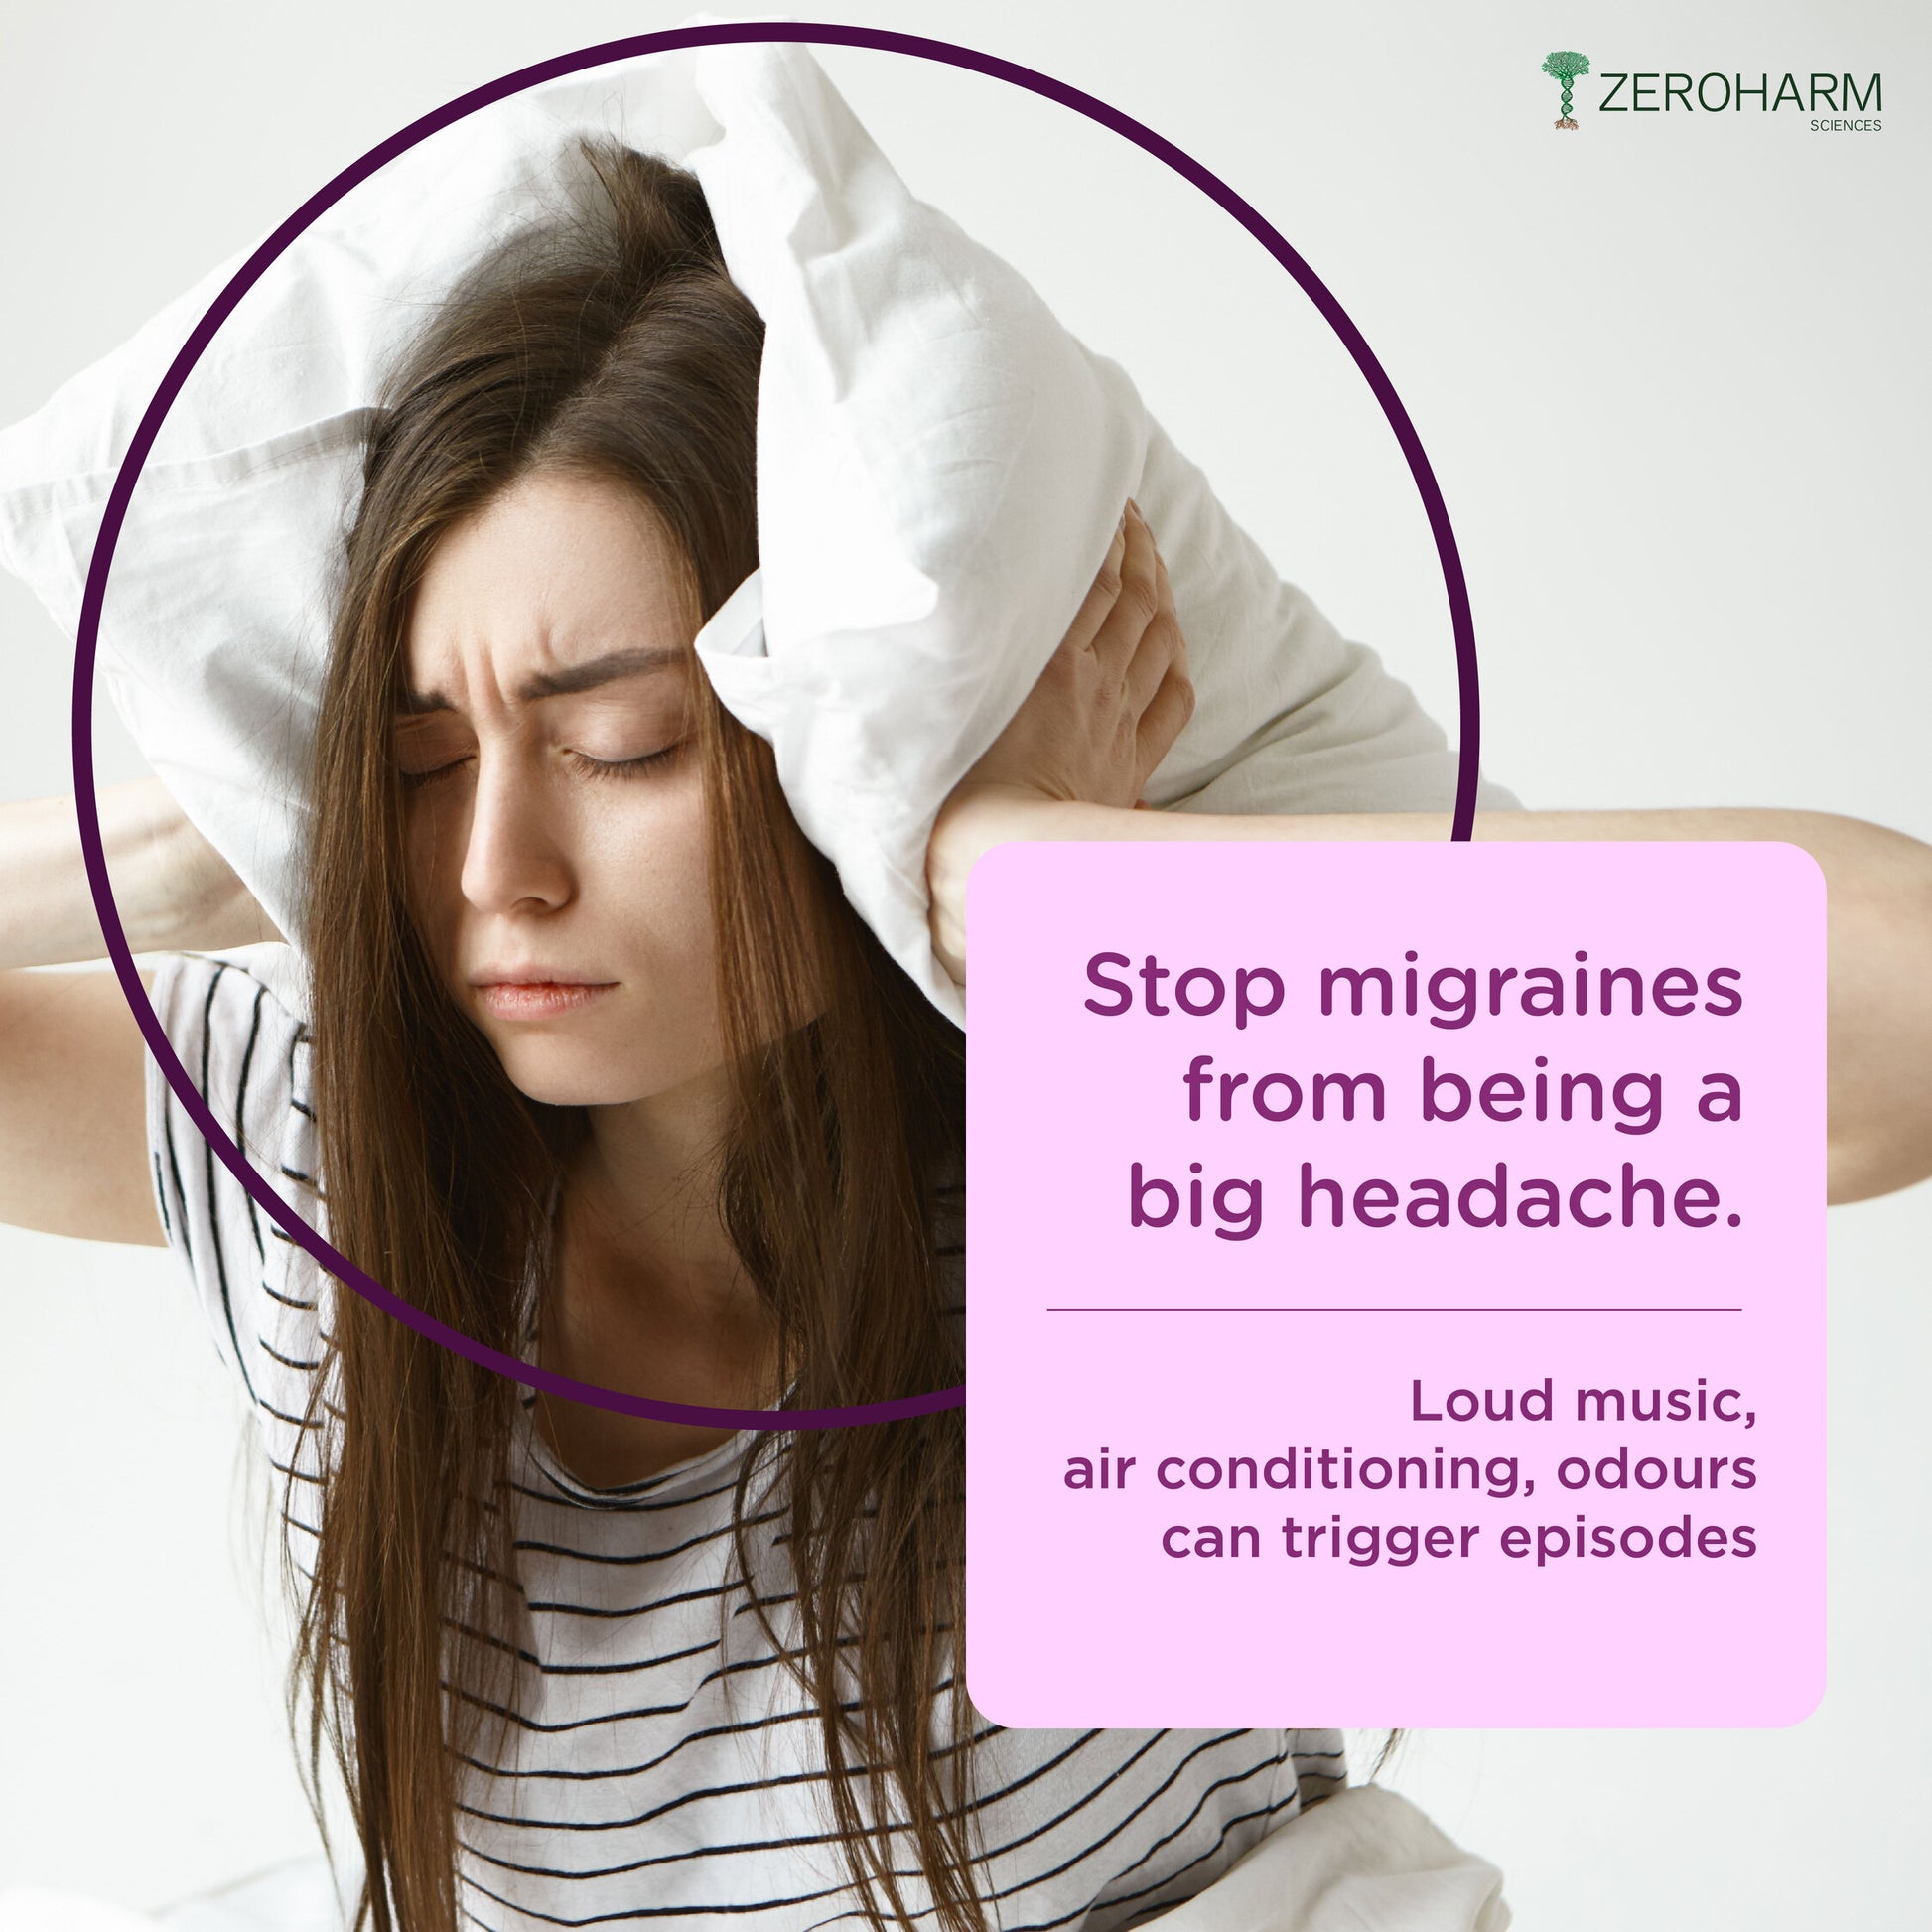 pill for migraine headaches due to loud music and odour trigger episodes